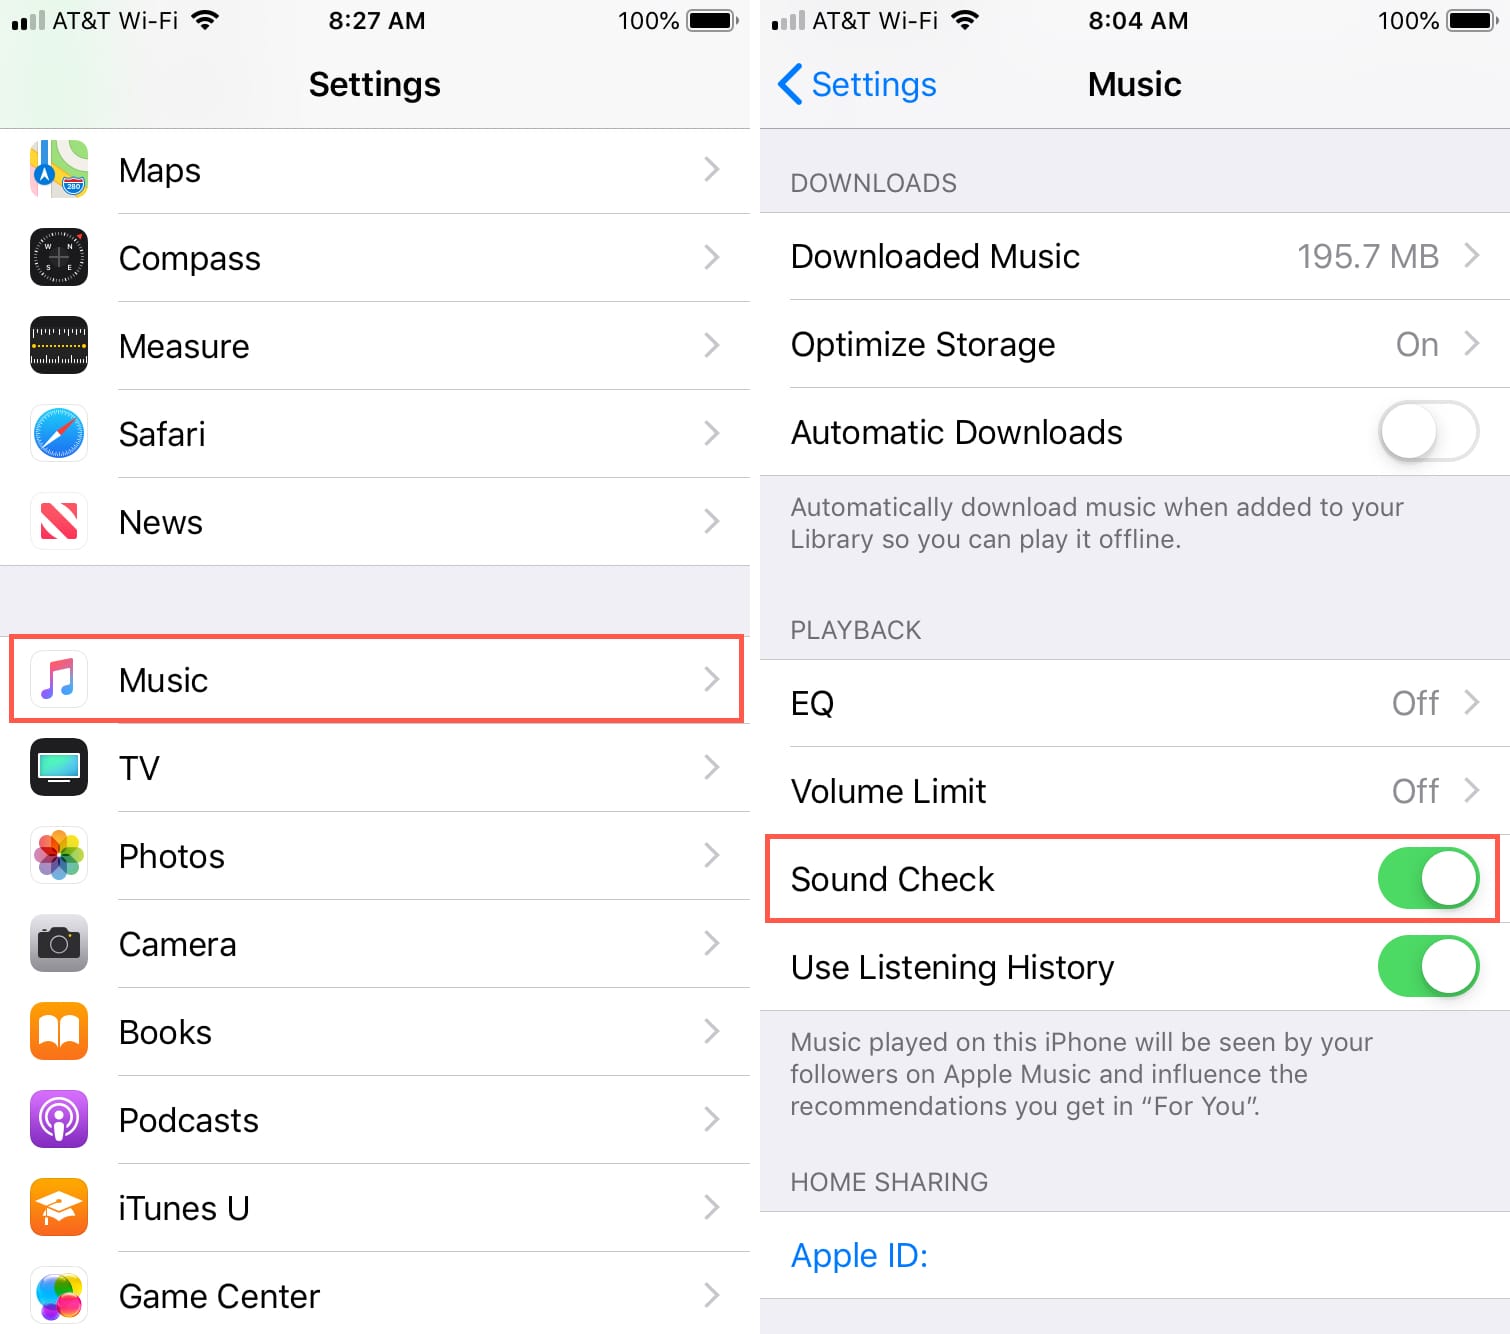 Enable Sound Check on iPhone